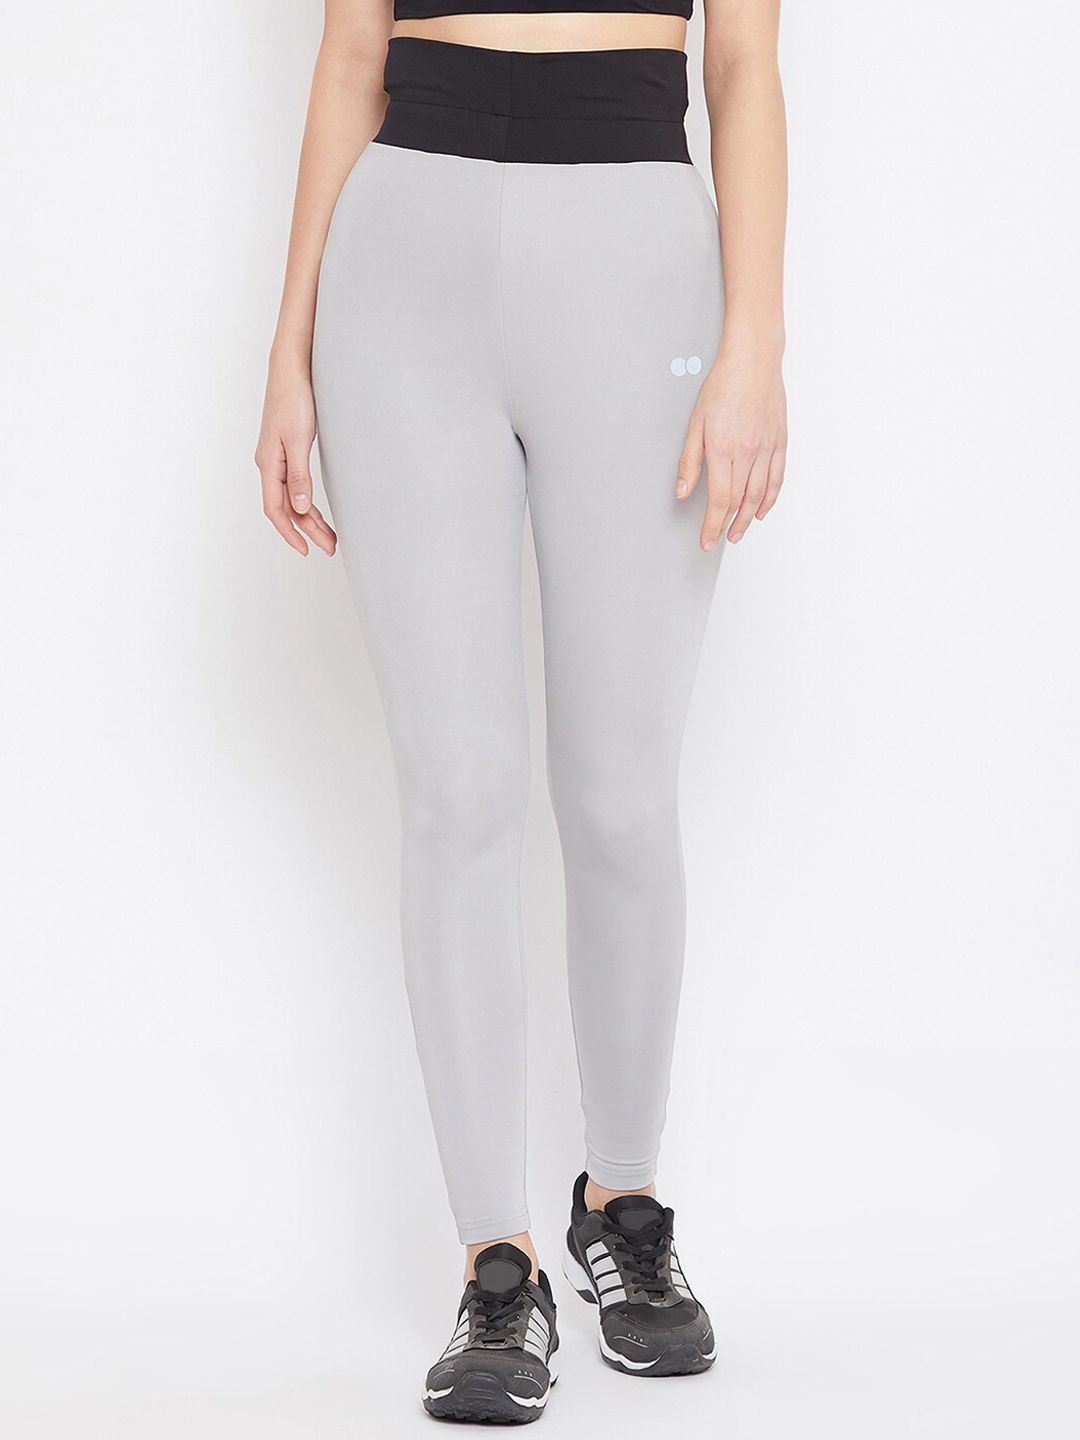 Clovia Women Grey Solid Ankle Length Training Tights Price in India